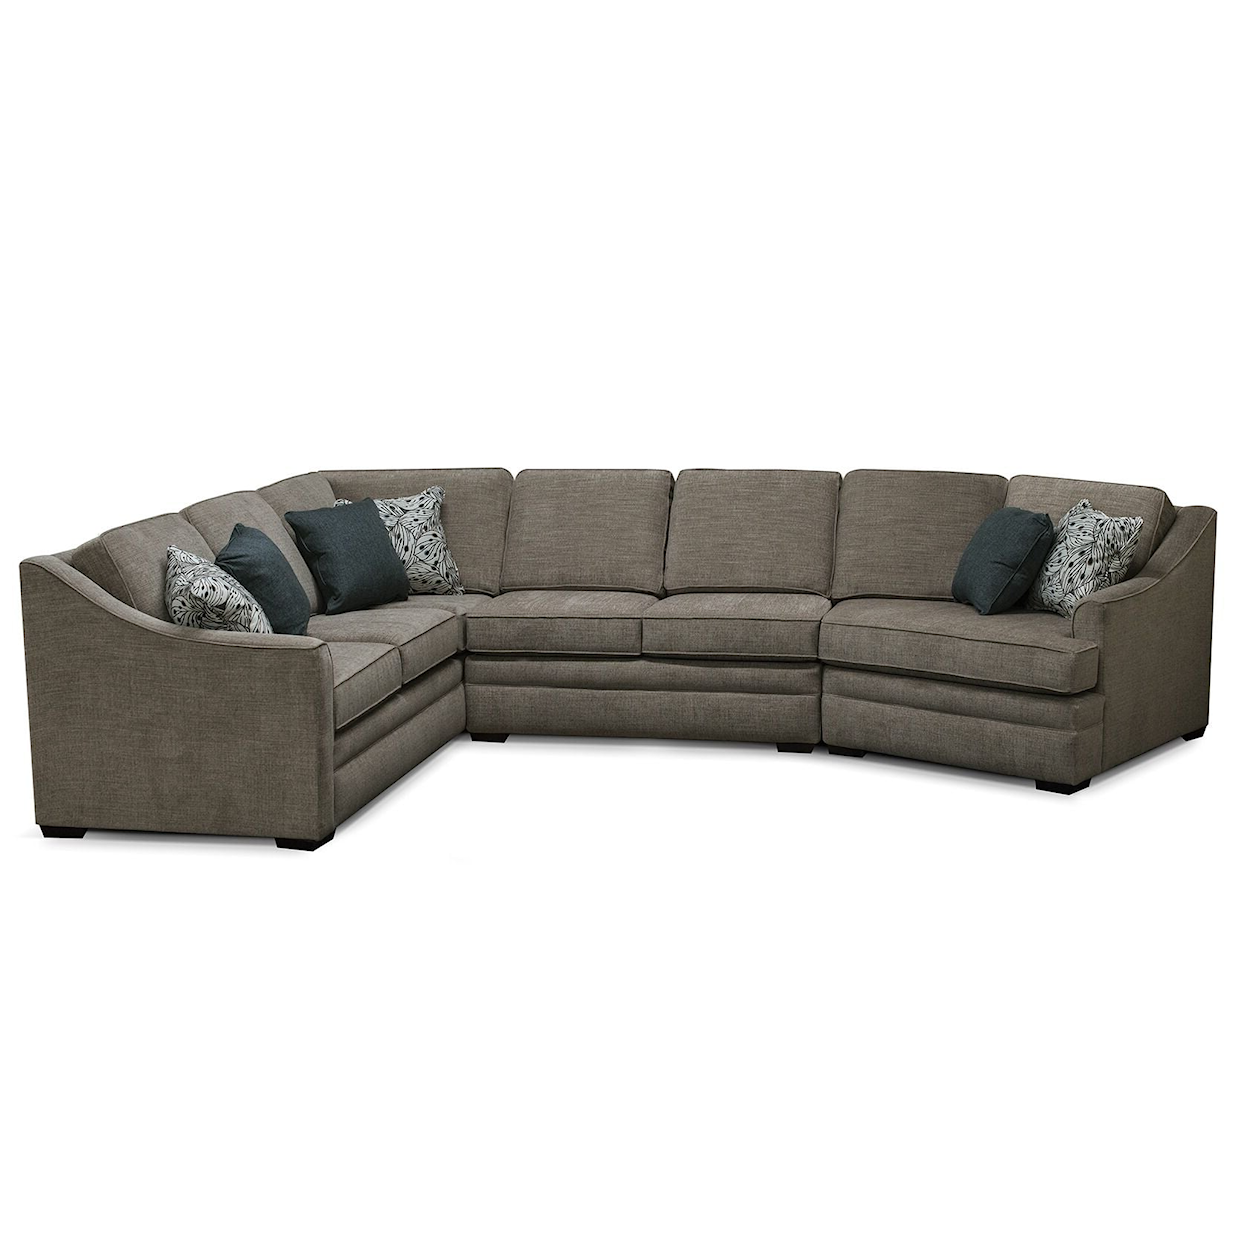 Dimensions 4T00 Series 3-Piece Sectional Sofa